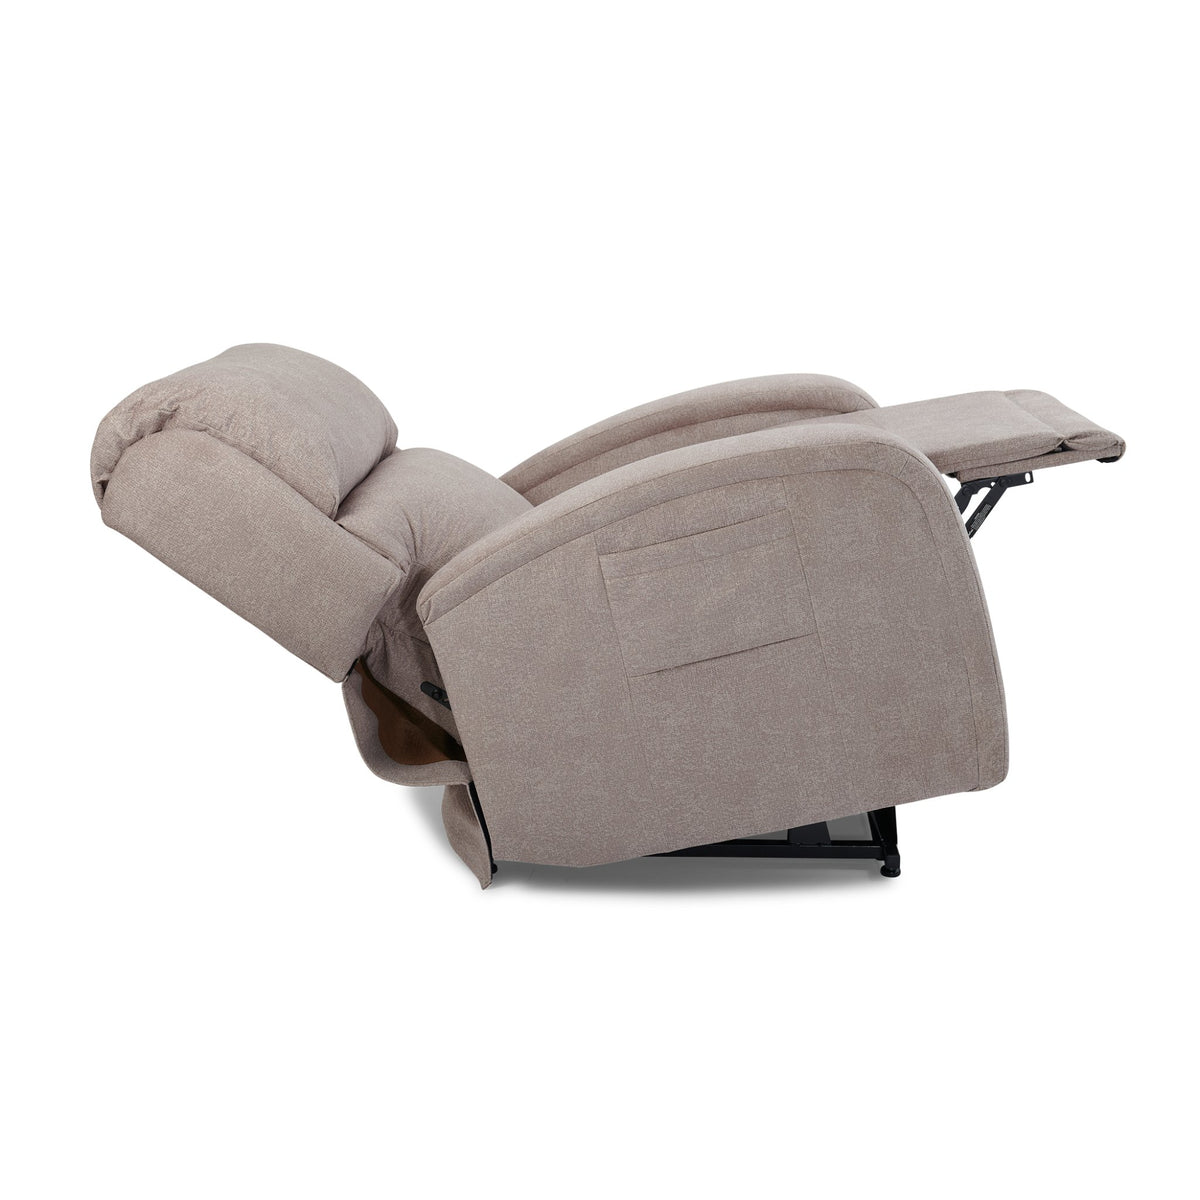 UltraComfort Apollo Power Lift Chair Recliner